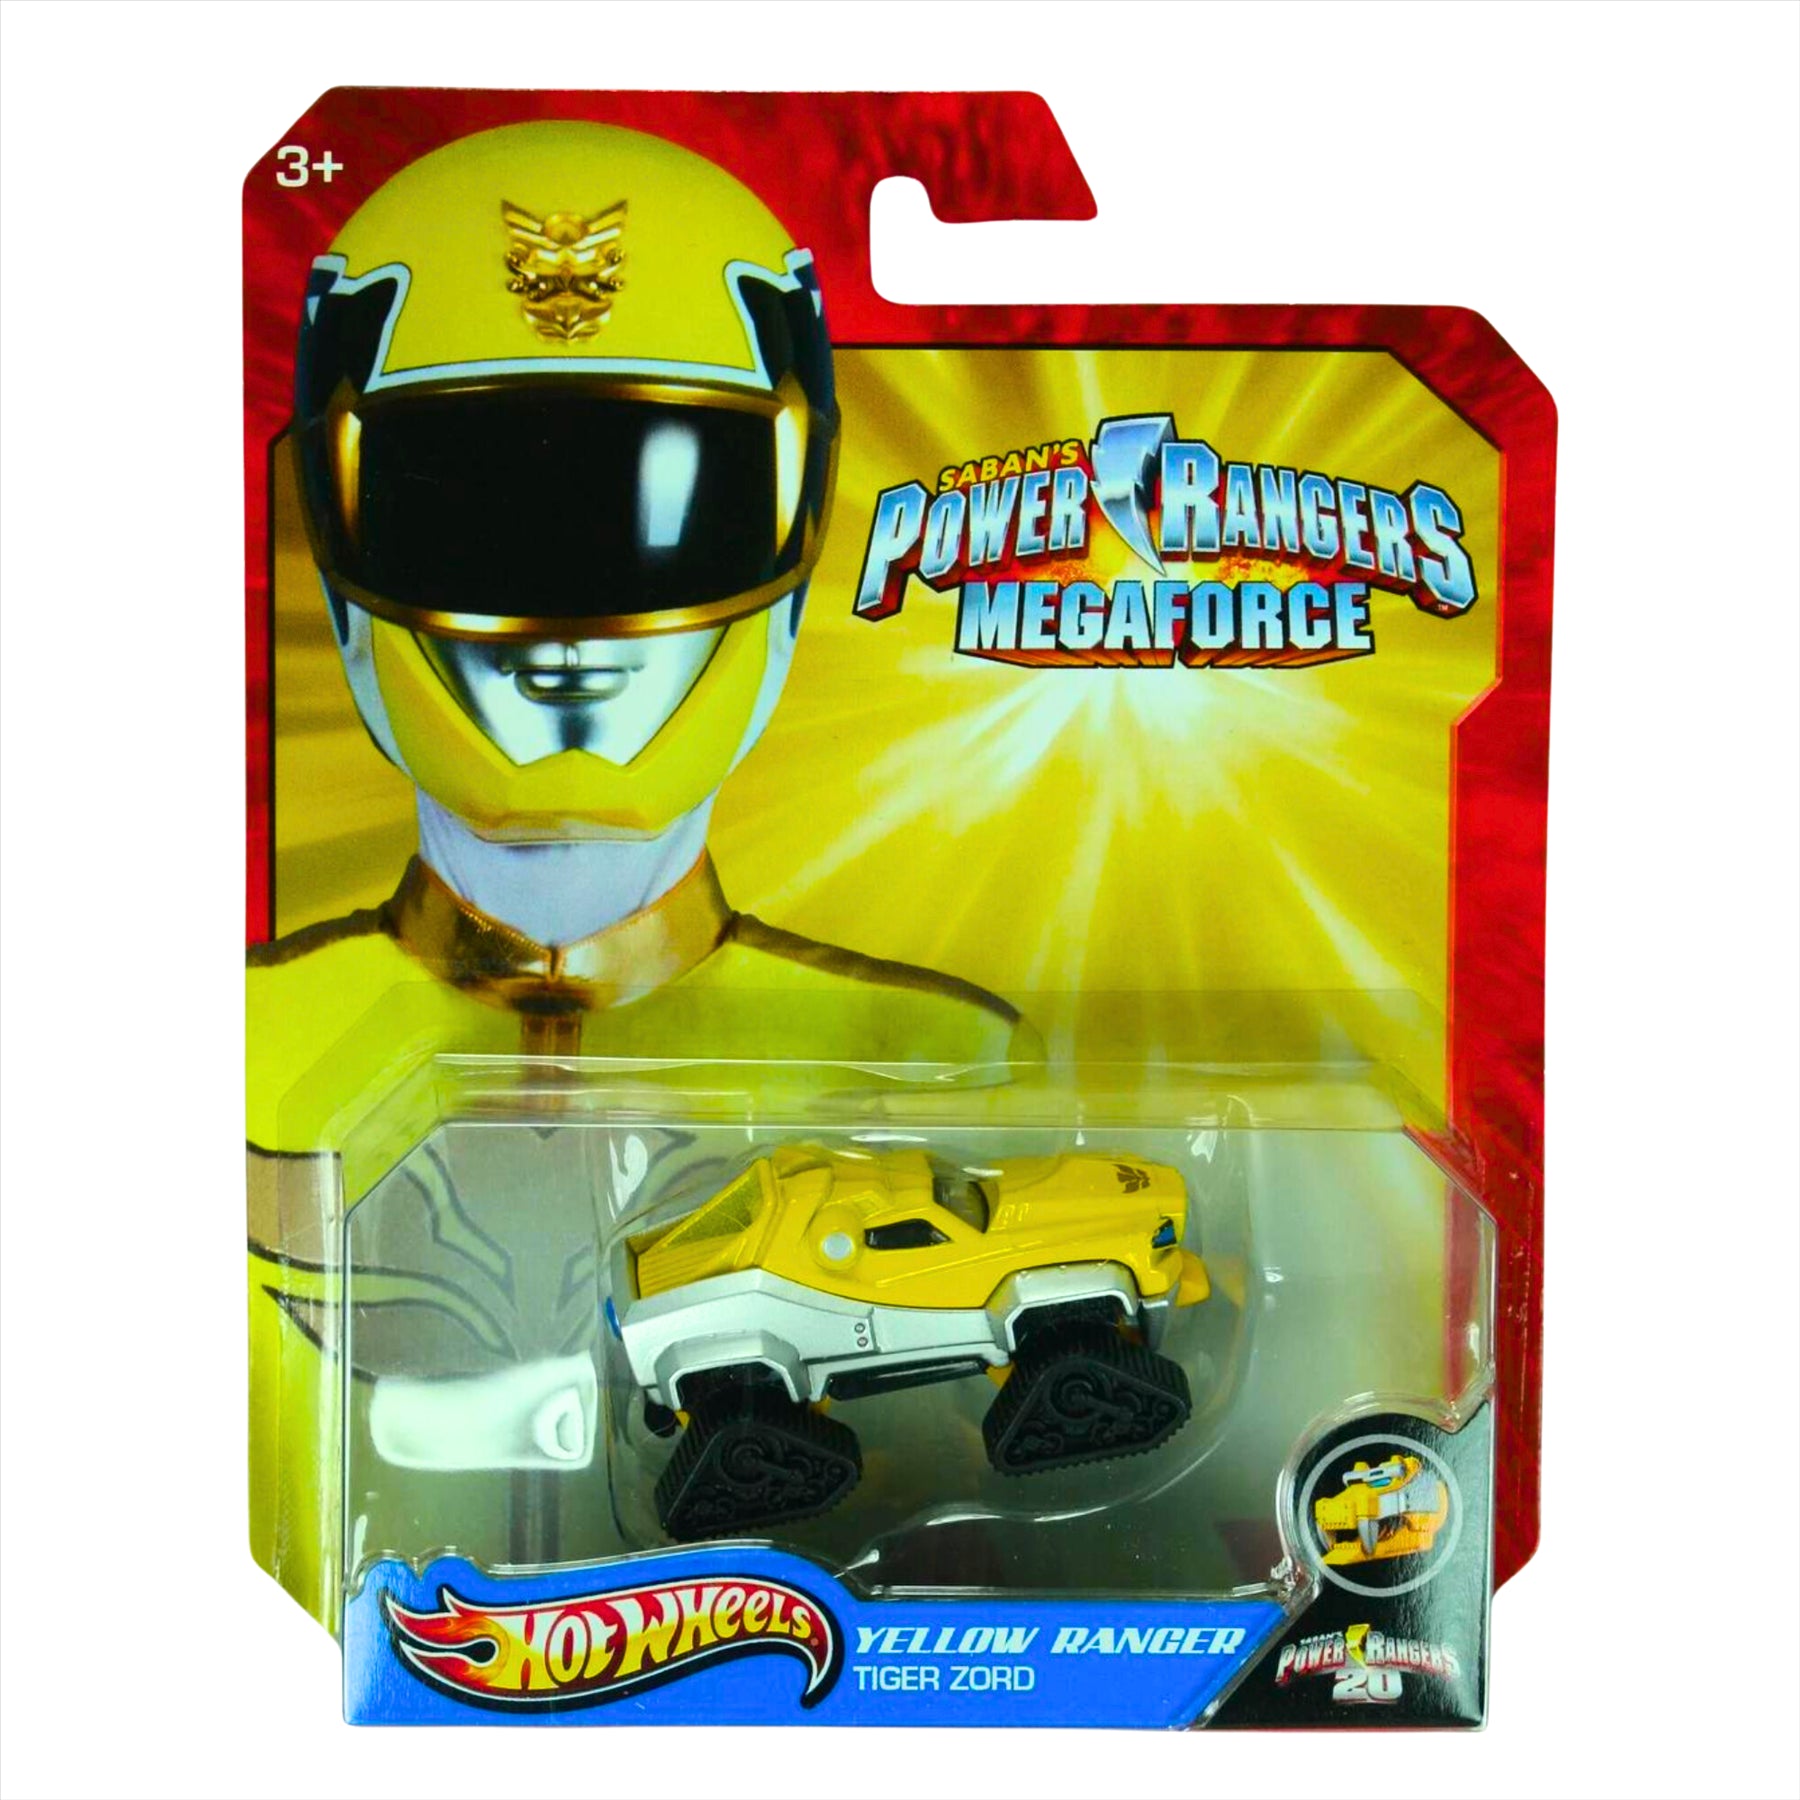 Hot Wheels Power Rangers MegaForce Robo Knight Lion Zord and Yellow Ranger Tiger Zord - Twin Pack - Toptoys2u